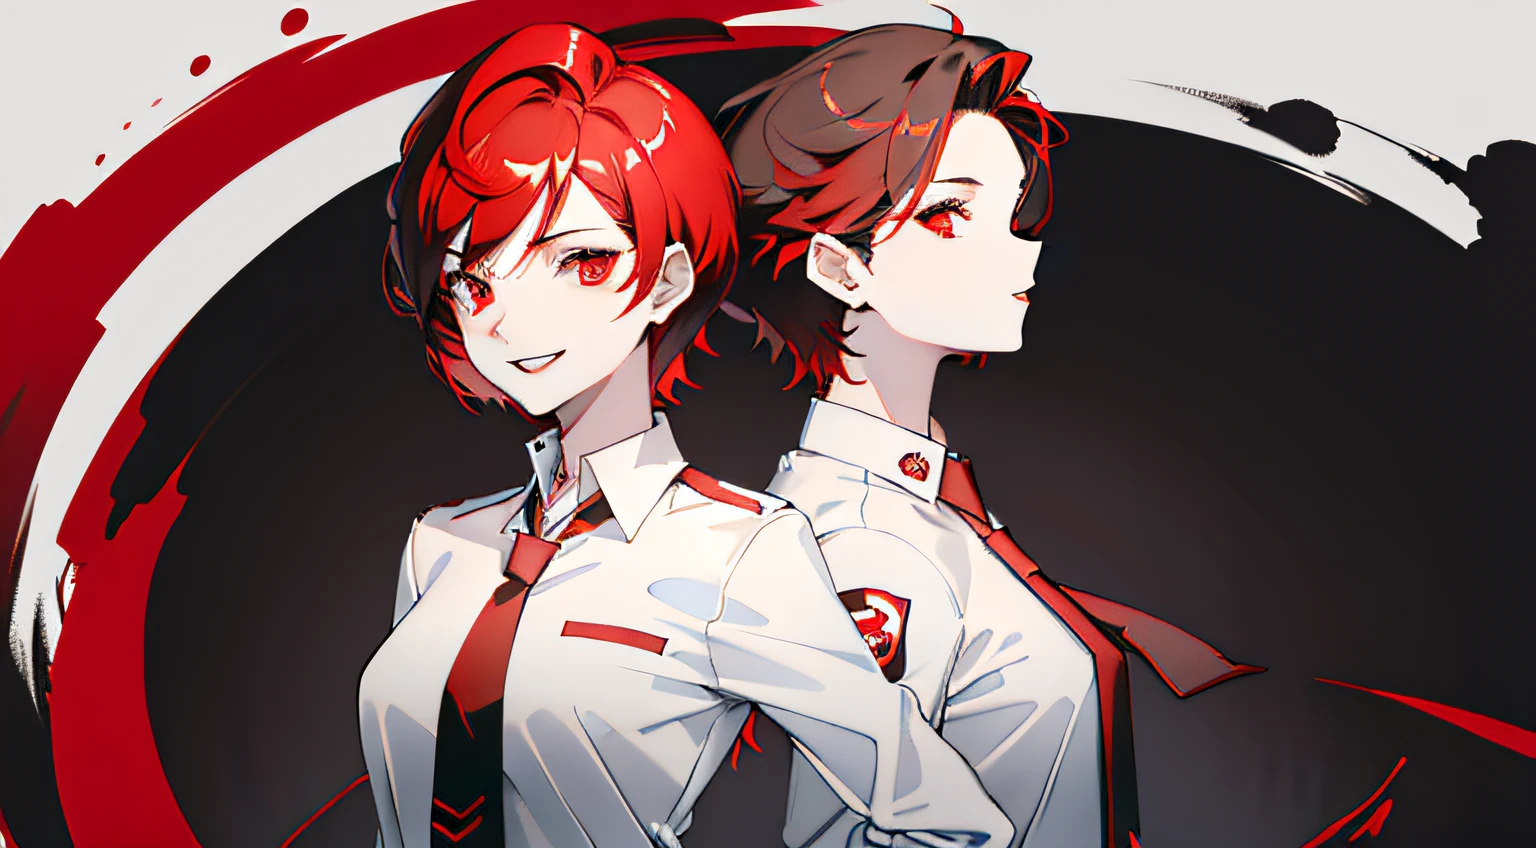 1girl with short red hair, red eyes, red lips and a tomboyish appearance, wearing a white shirt with a black blueish tie, black and red jacket, paired with back bluish long pants. She has red devil horns and a crazy mad smile on her face